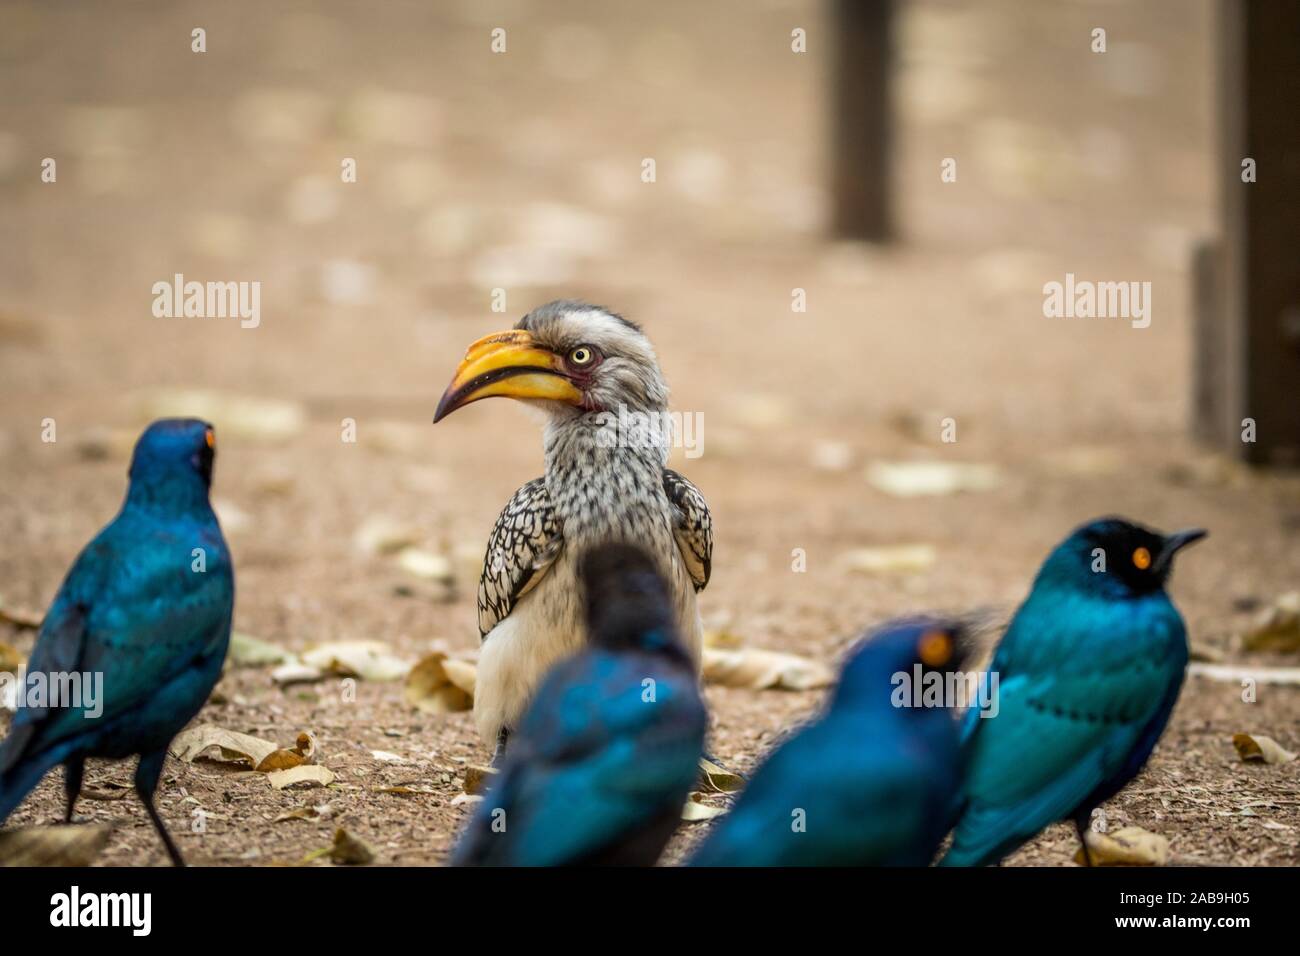 Yellow-billed hornbill and Cape glossy starlings sitting on the ground in the Kruger National Park, South Africa. Stock Photo